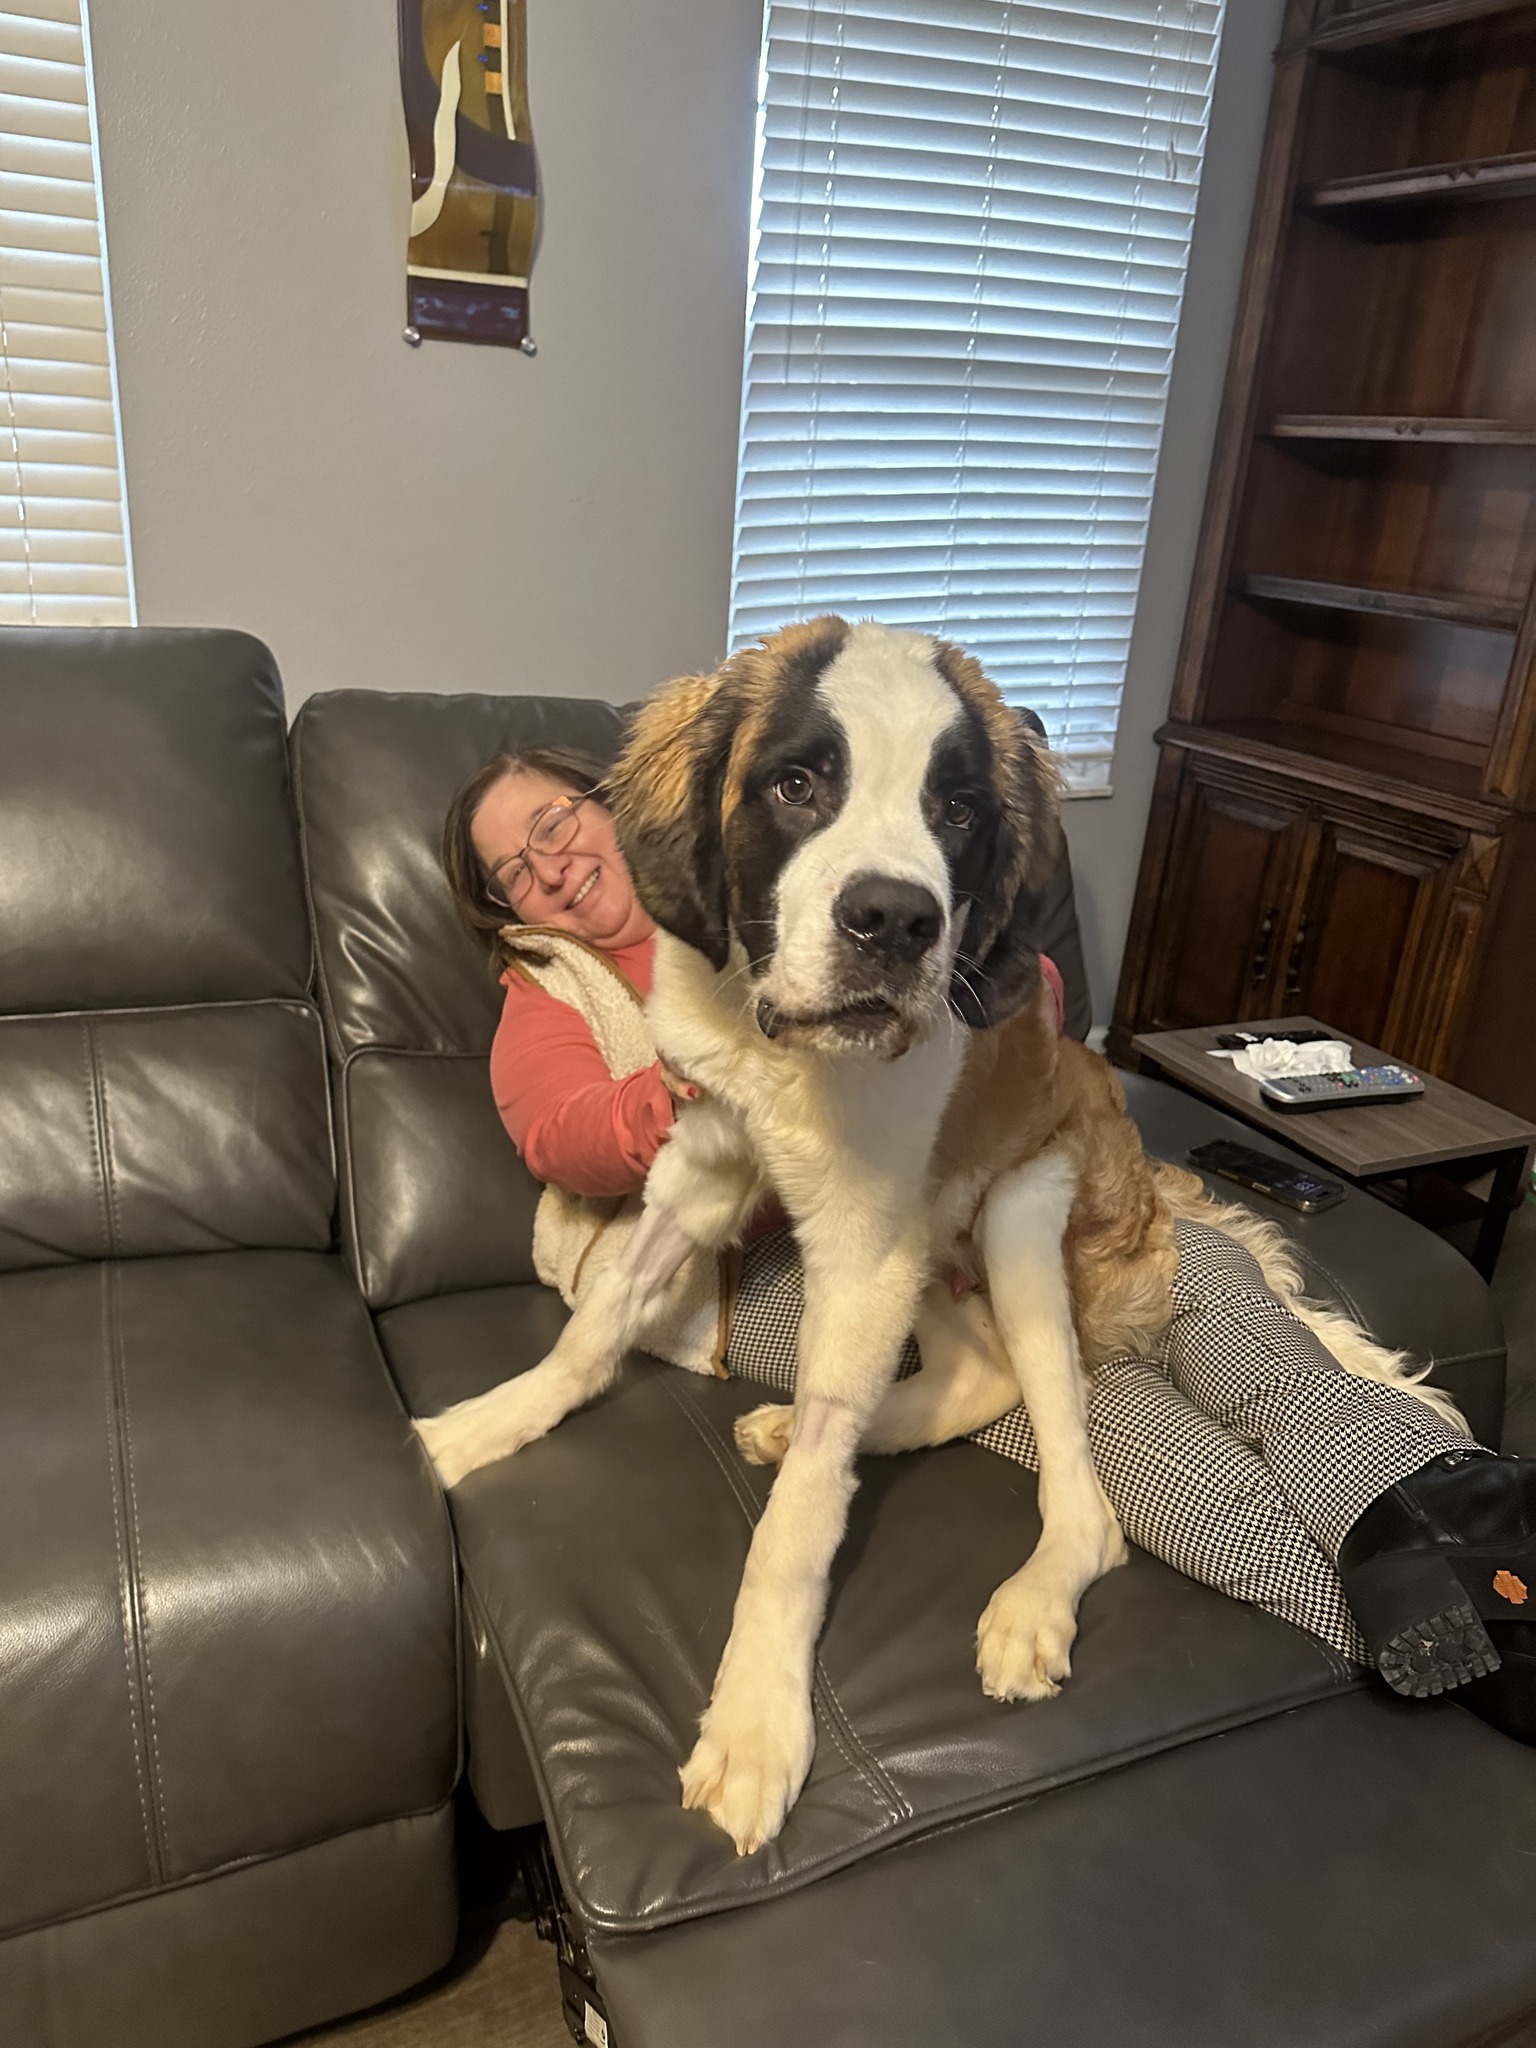 st bernard dog sitting in woman's lap on a couch